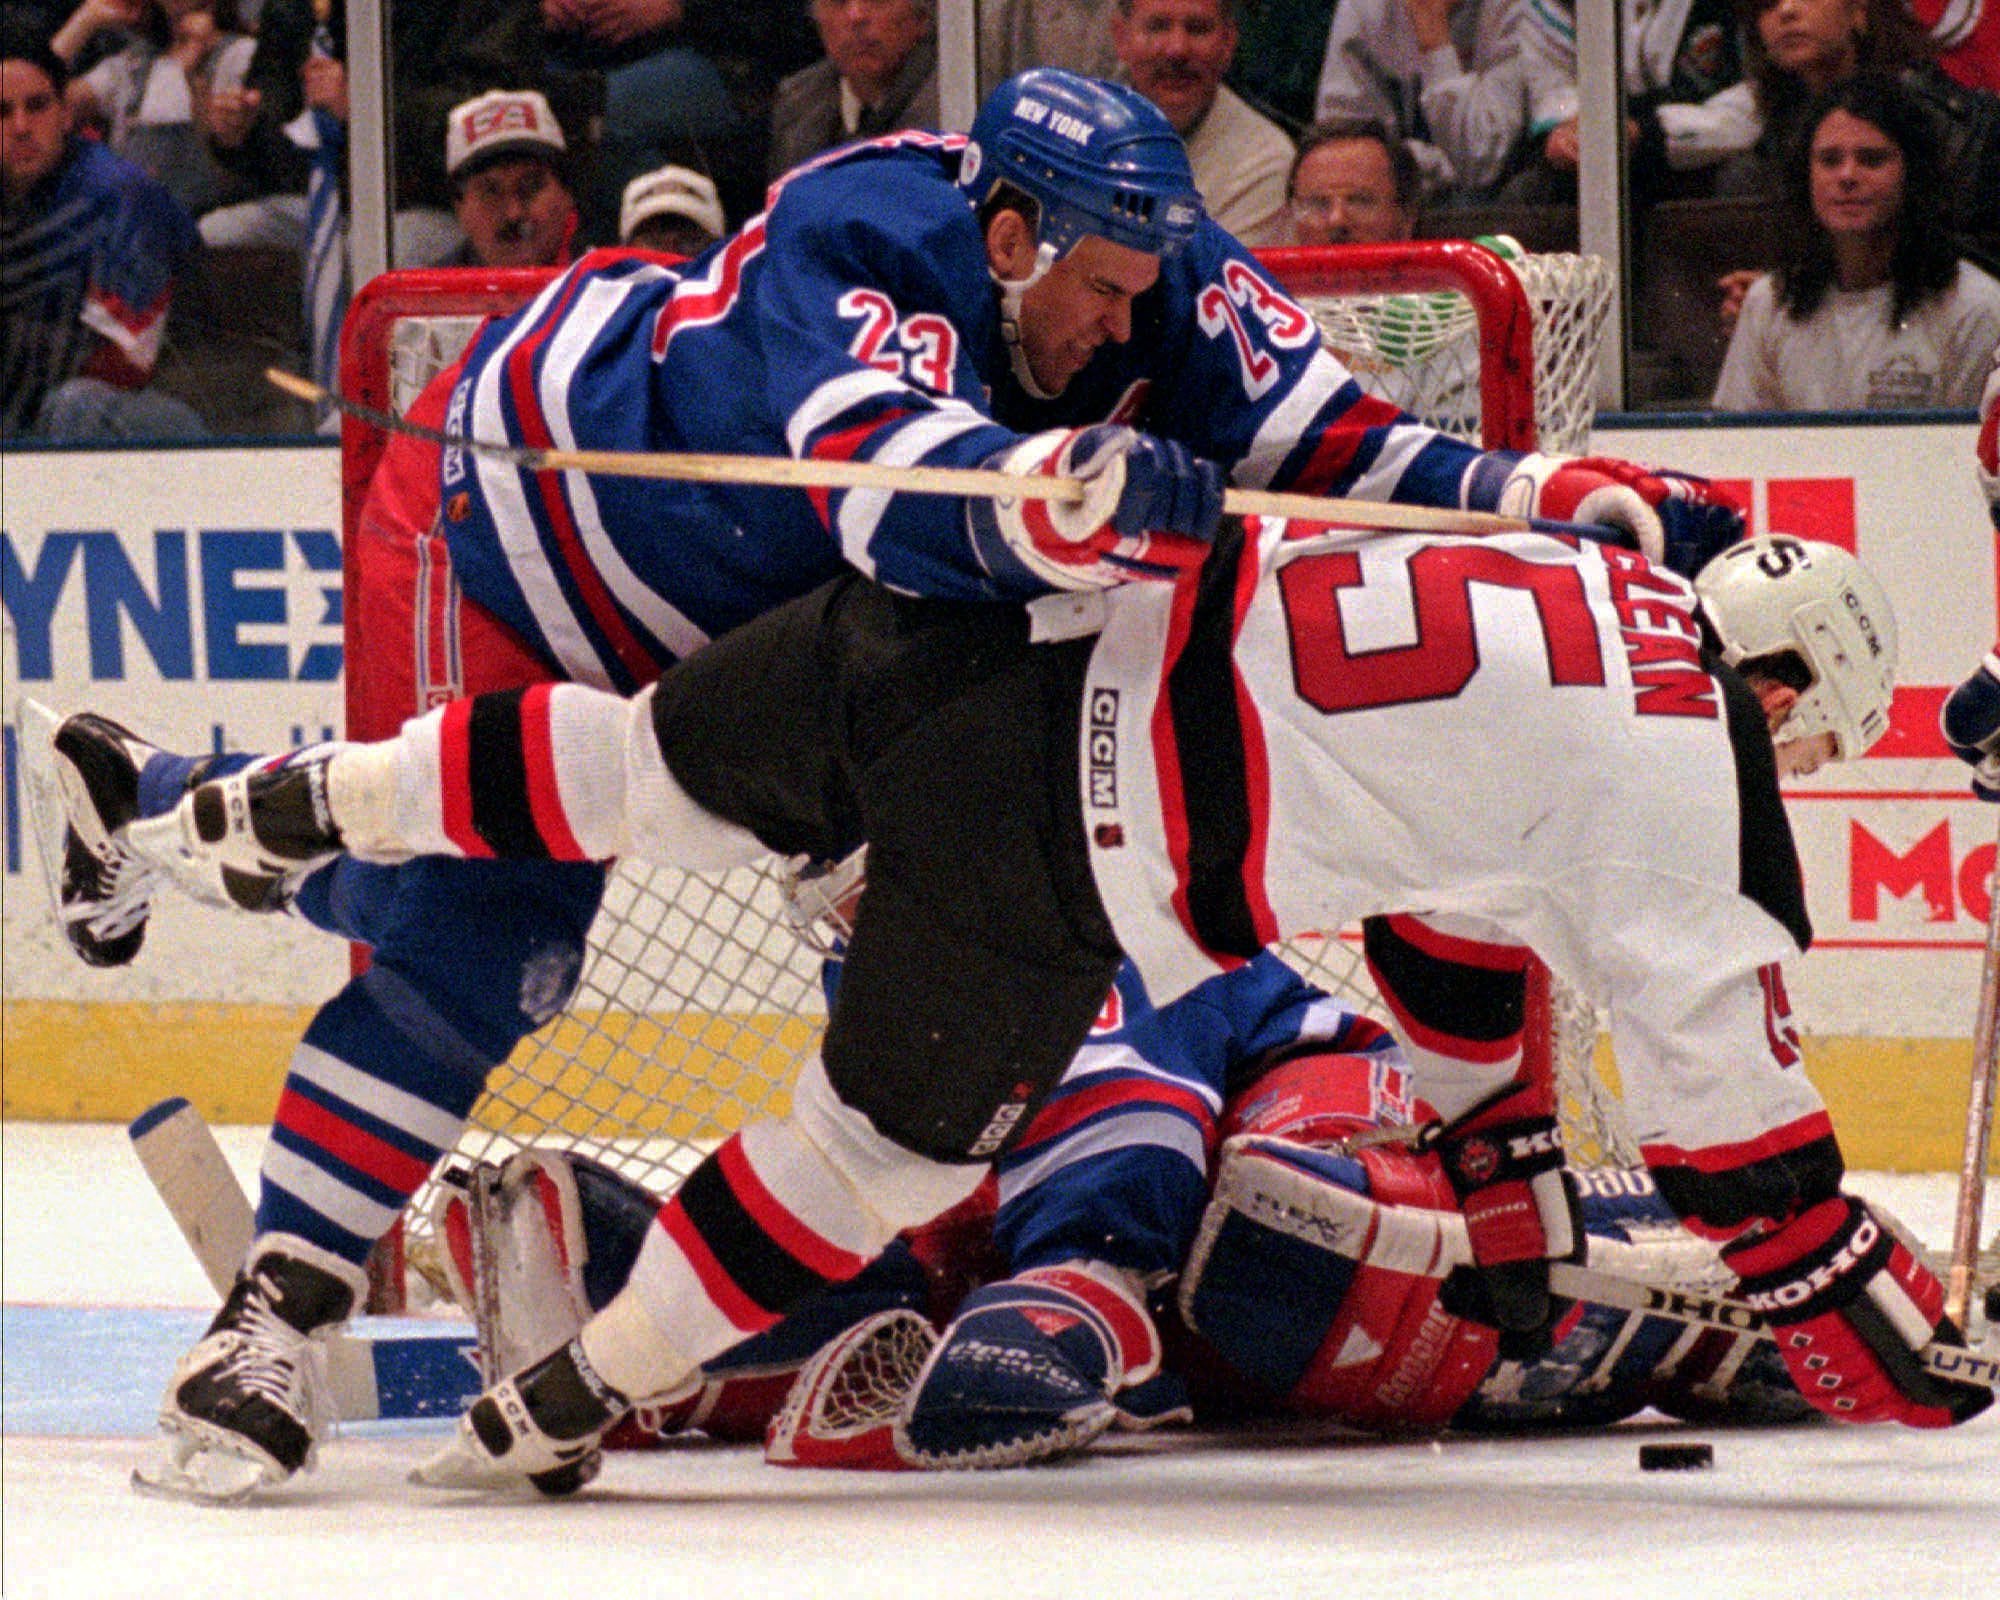 FILE--New Jersey Devils' John MacLean (15) is checked to the ice by New York Rangers' Jeff Beukeboom (23) as MacLean attempted to get his stick on the puck in front of Rangers goaltender Mike Richter, rear, in this April 7, 1996 photo, in East Rutherford, N.J. Beukeboom said Thursday he will be unable to resume his NHL career because of a series of concussions last season. (AP Photo/Bill Kostroun)